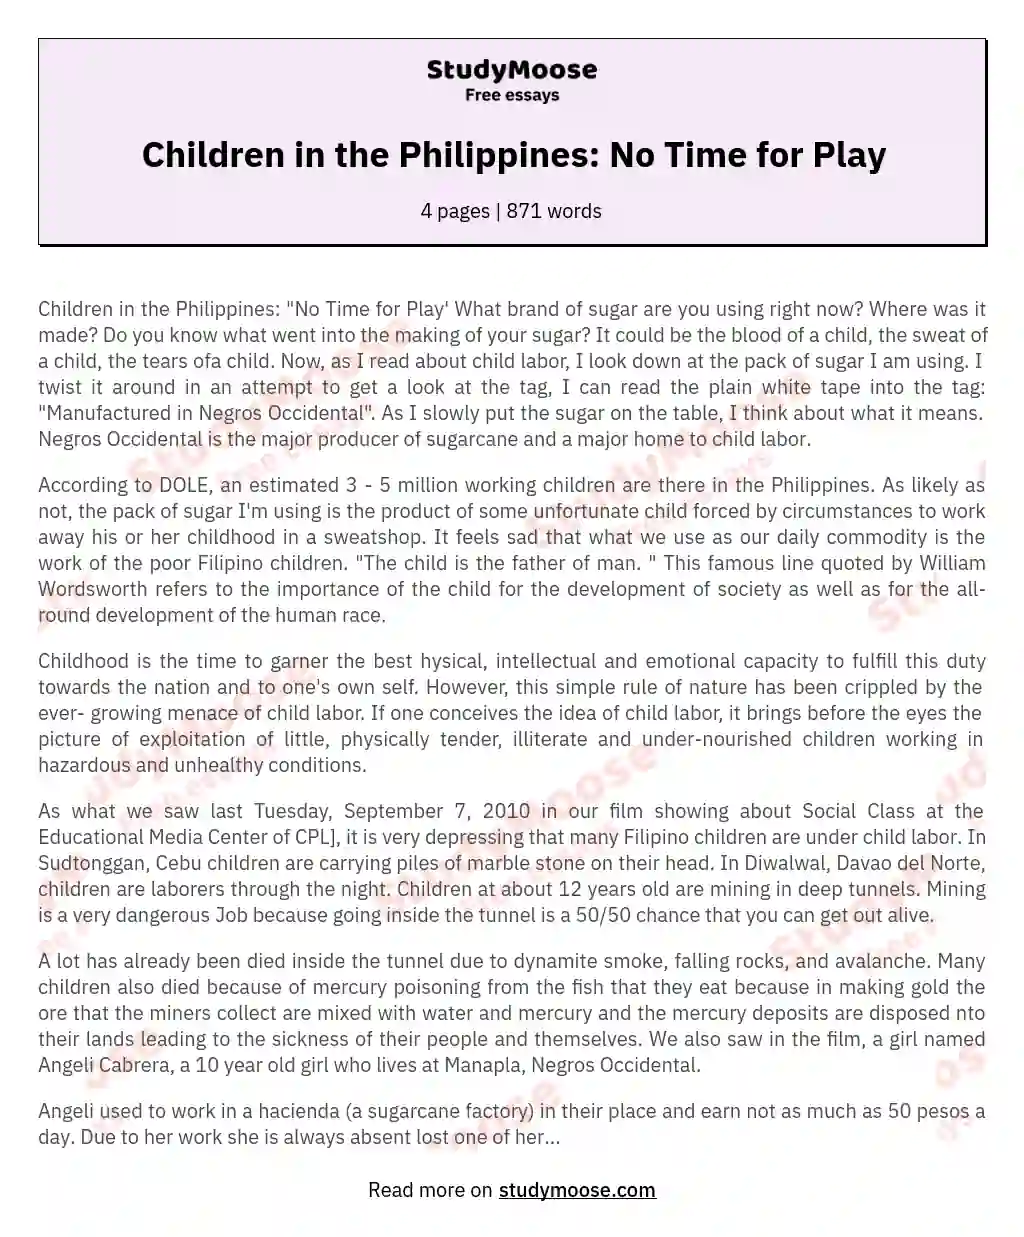 Children in the Philippines: No Time for Play essay